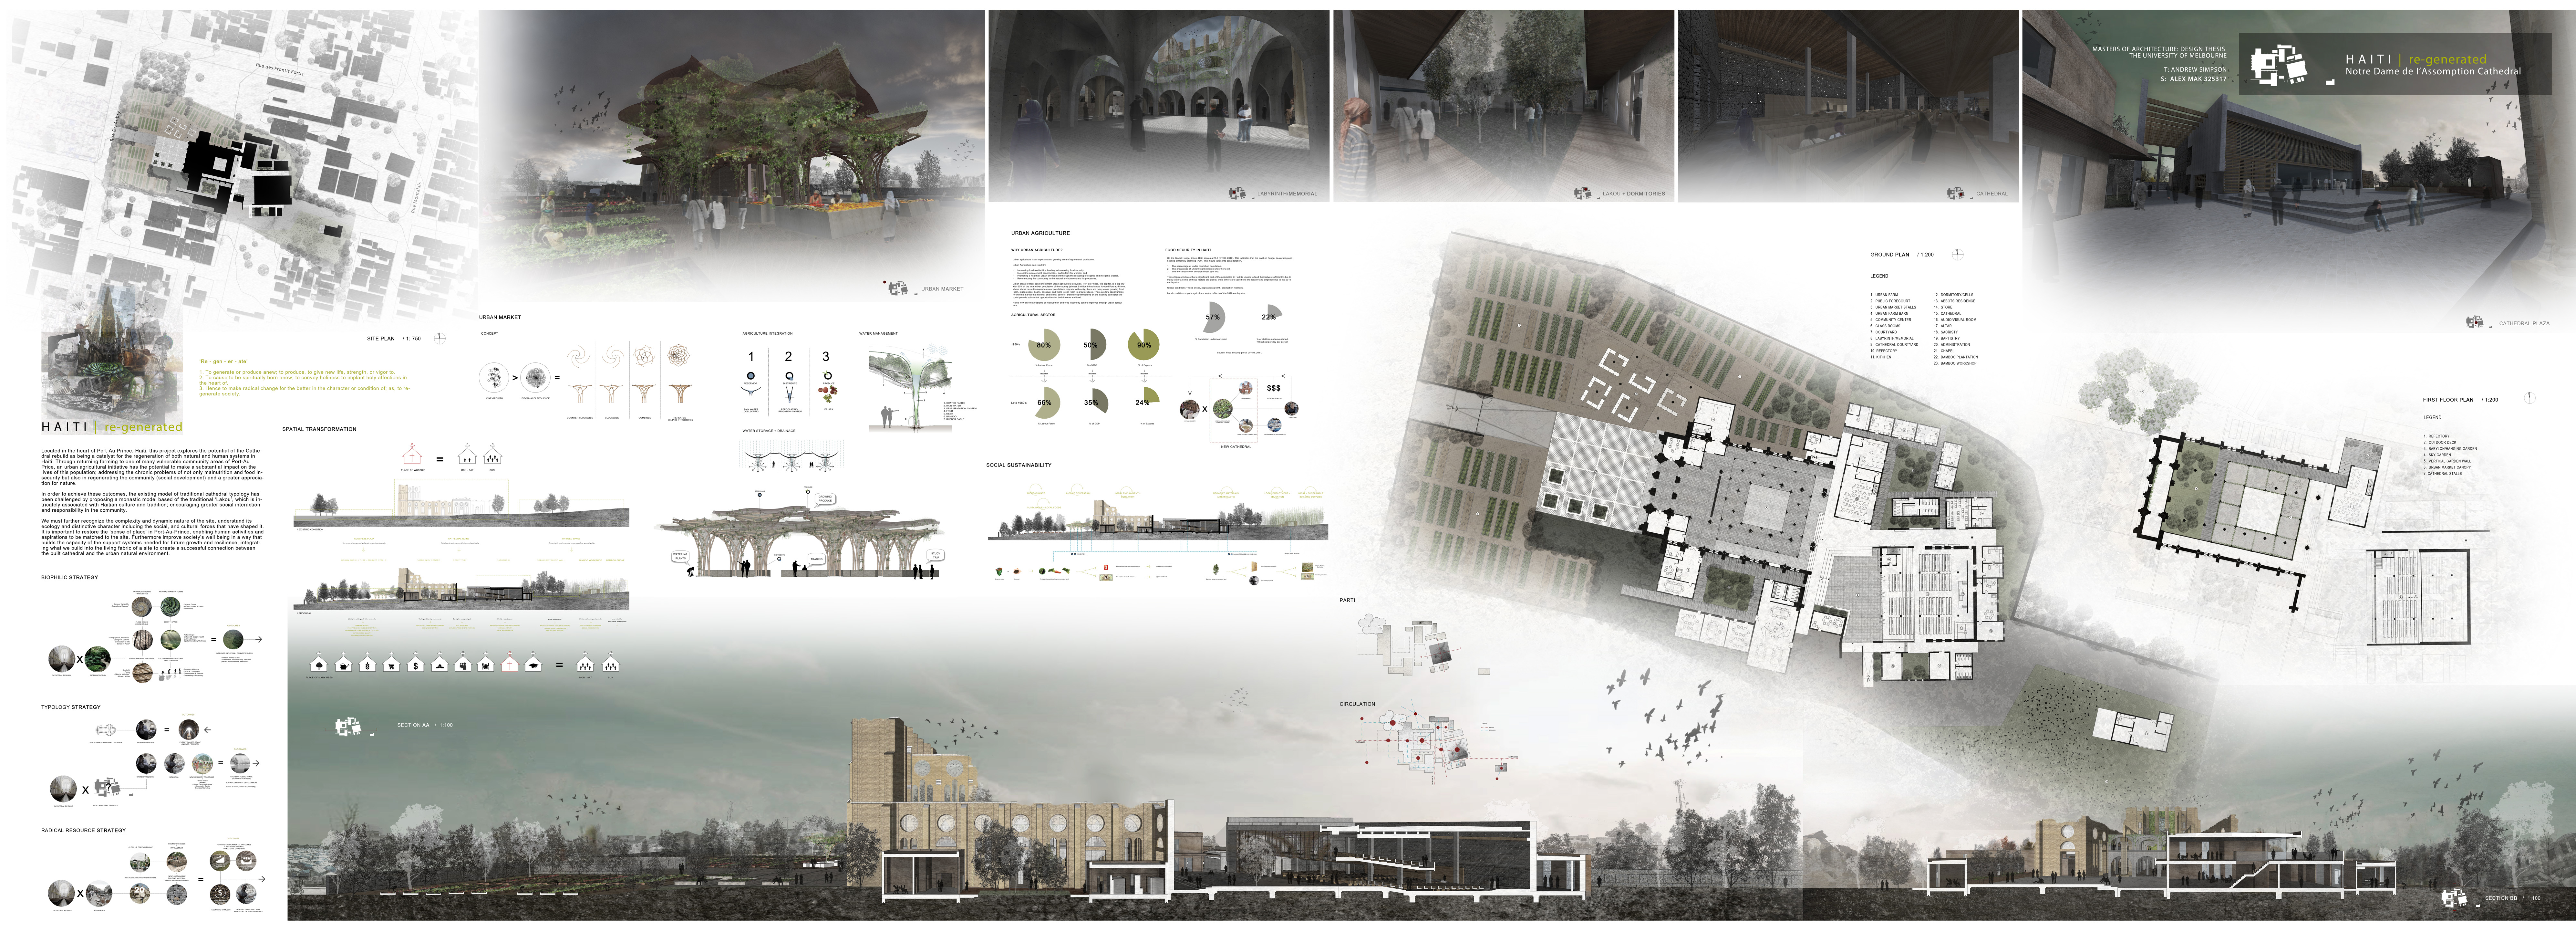 architectural thesis presentation sheets